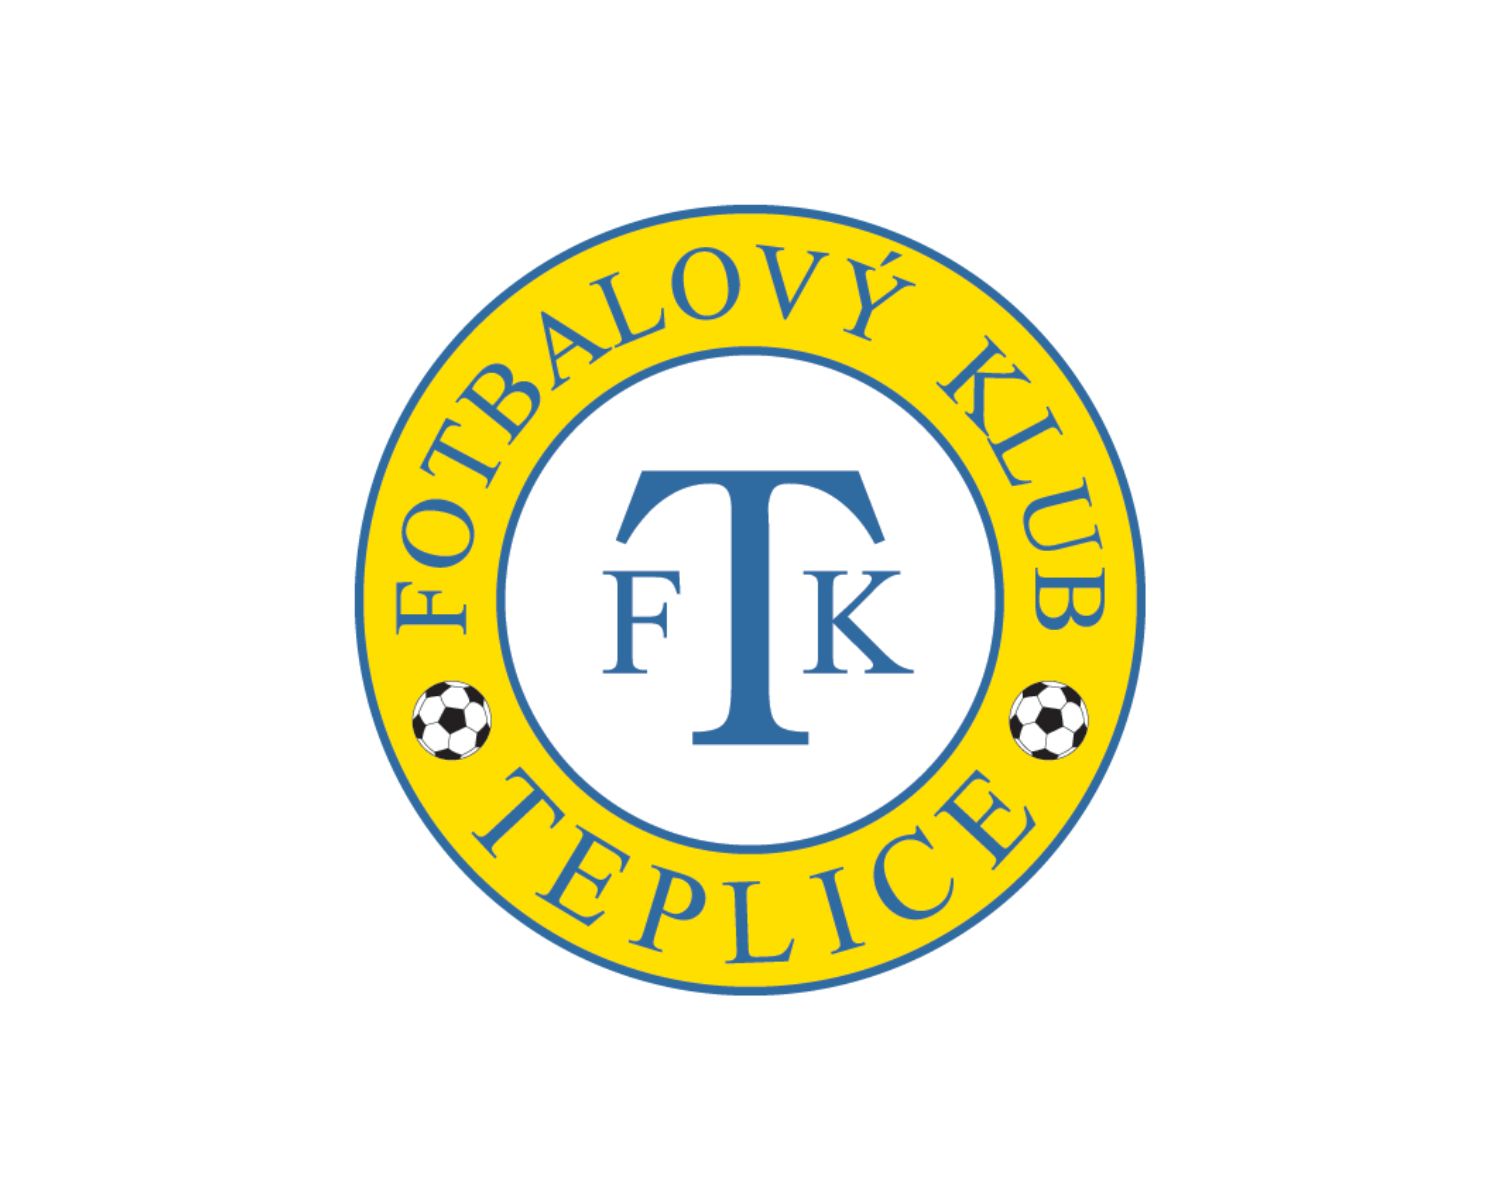 fk-teplice-22-football-club-facts